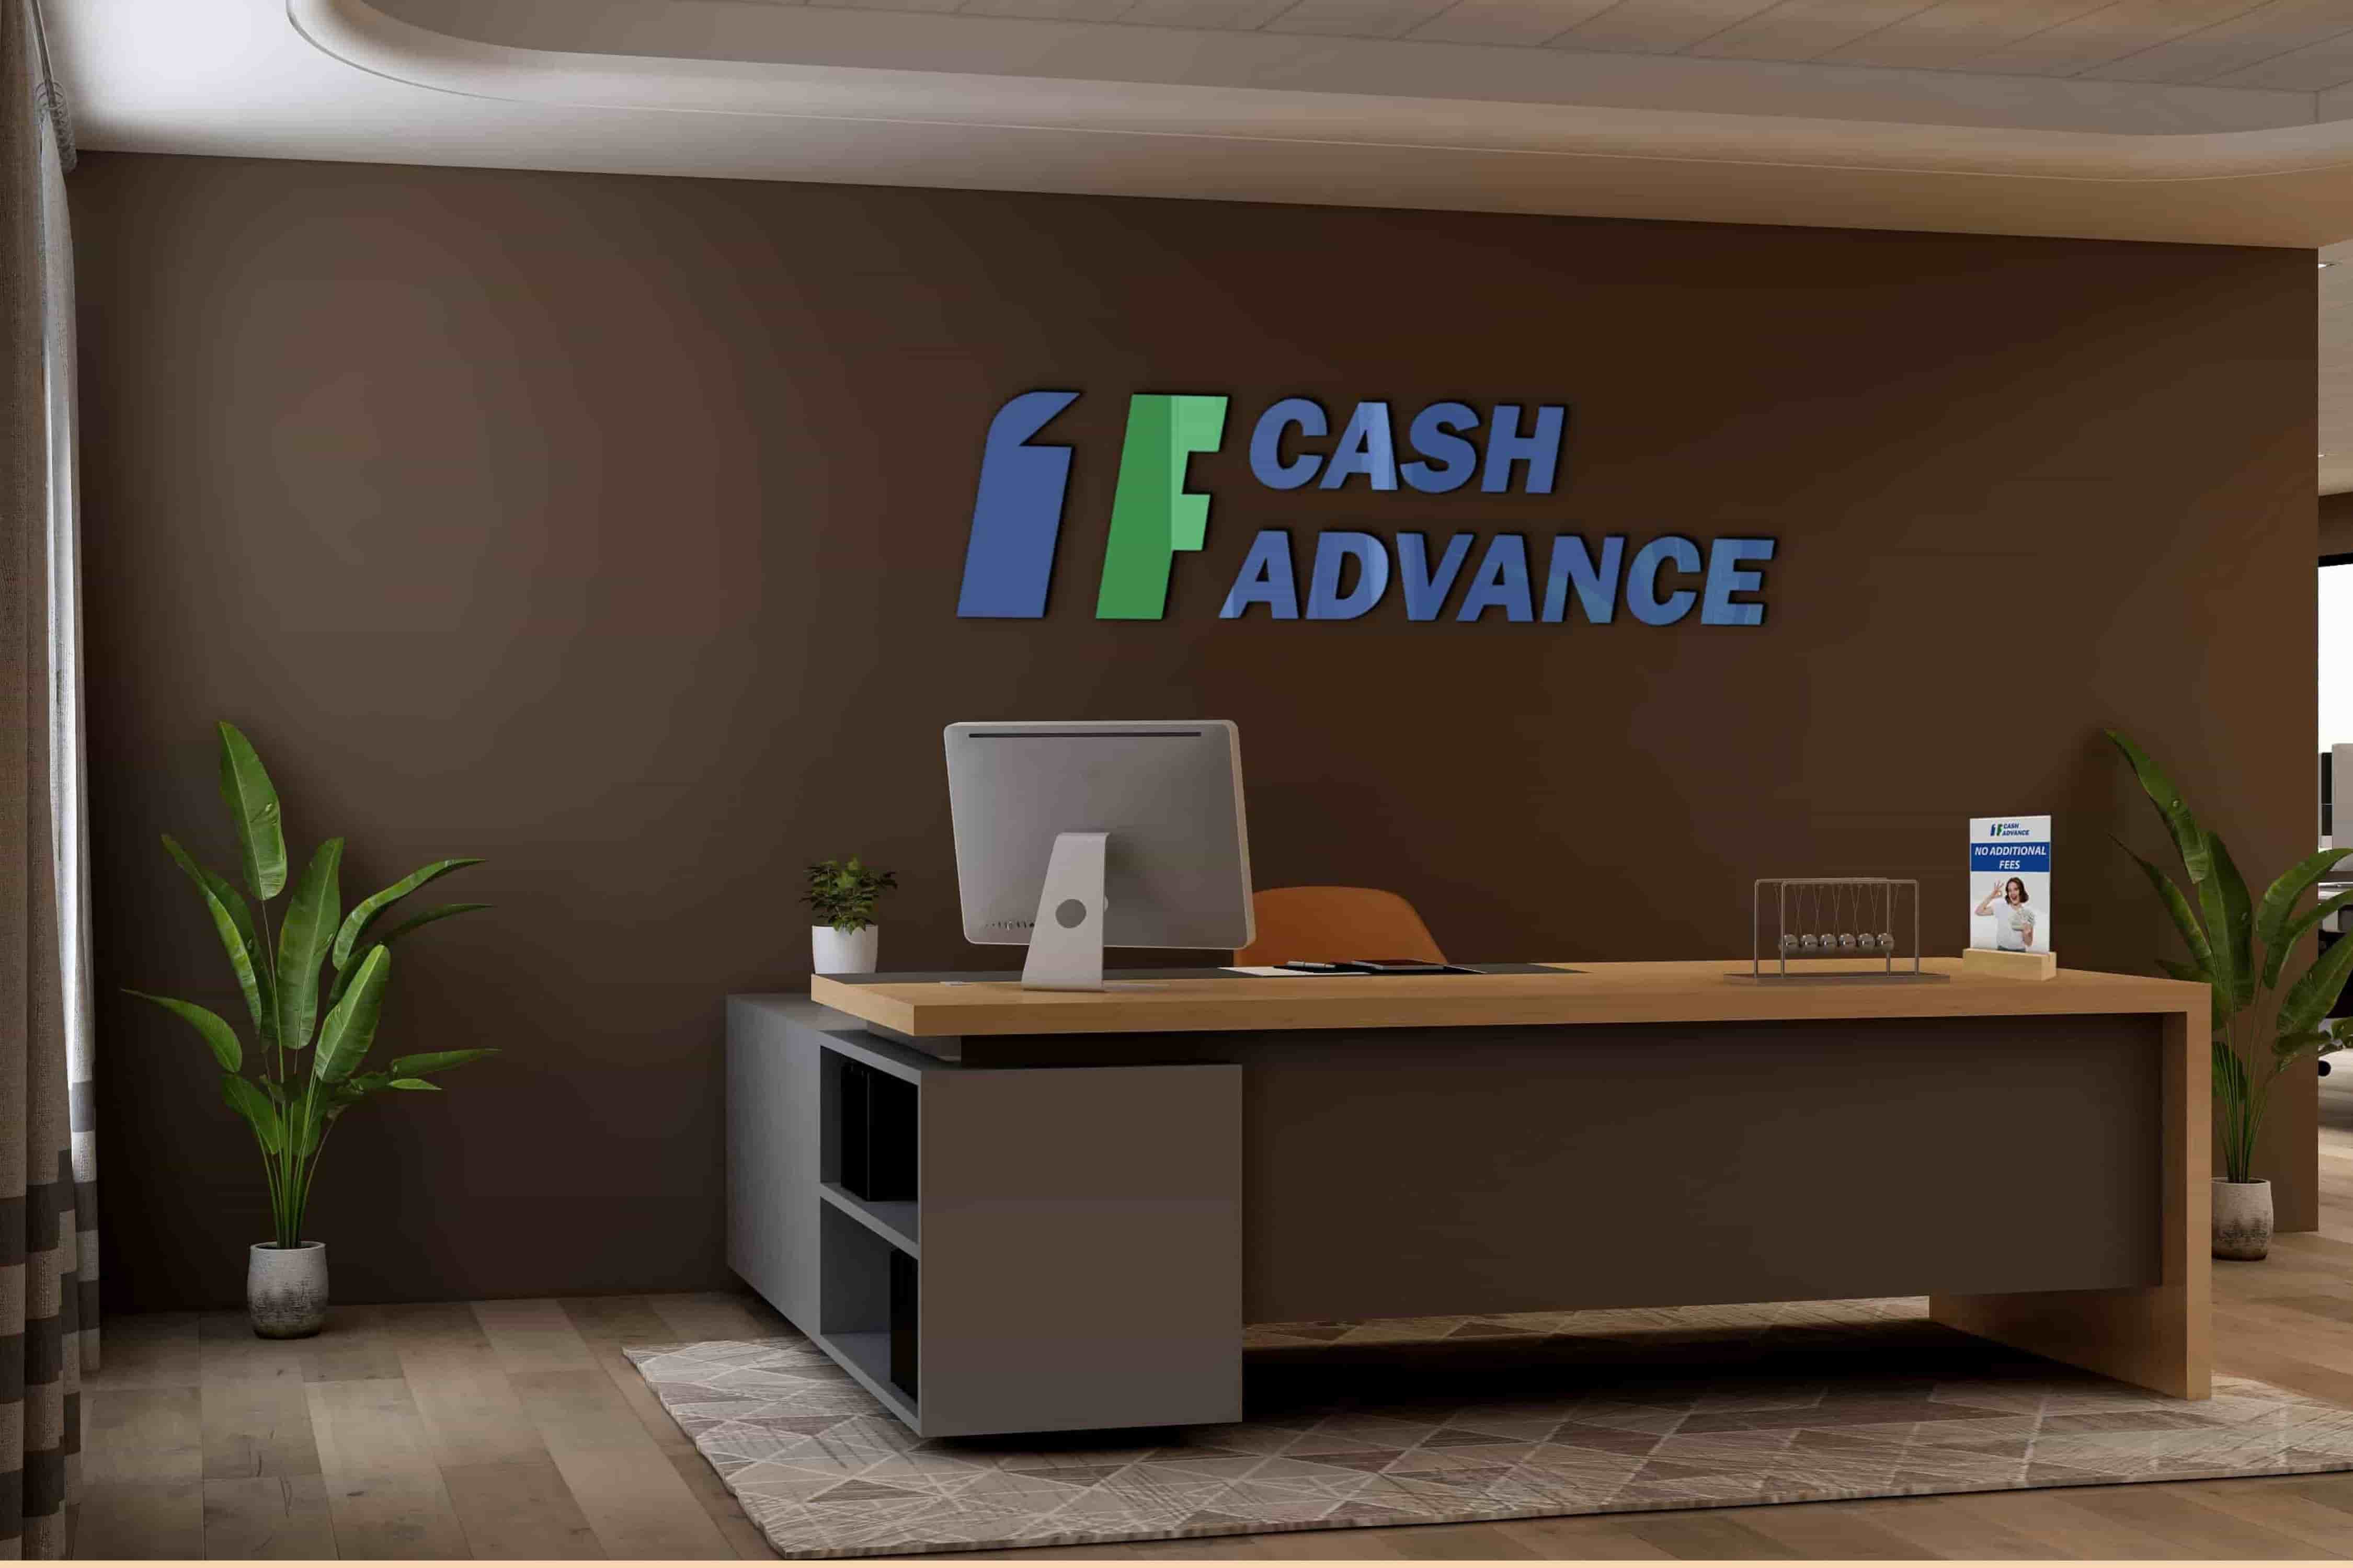 1F Cash Advance payday loans in Sioux Falls, SD